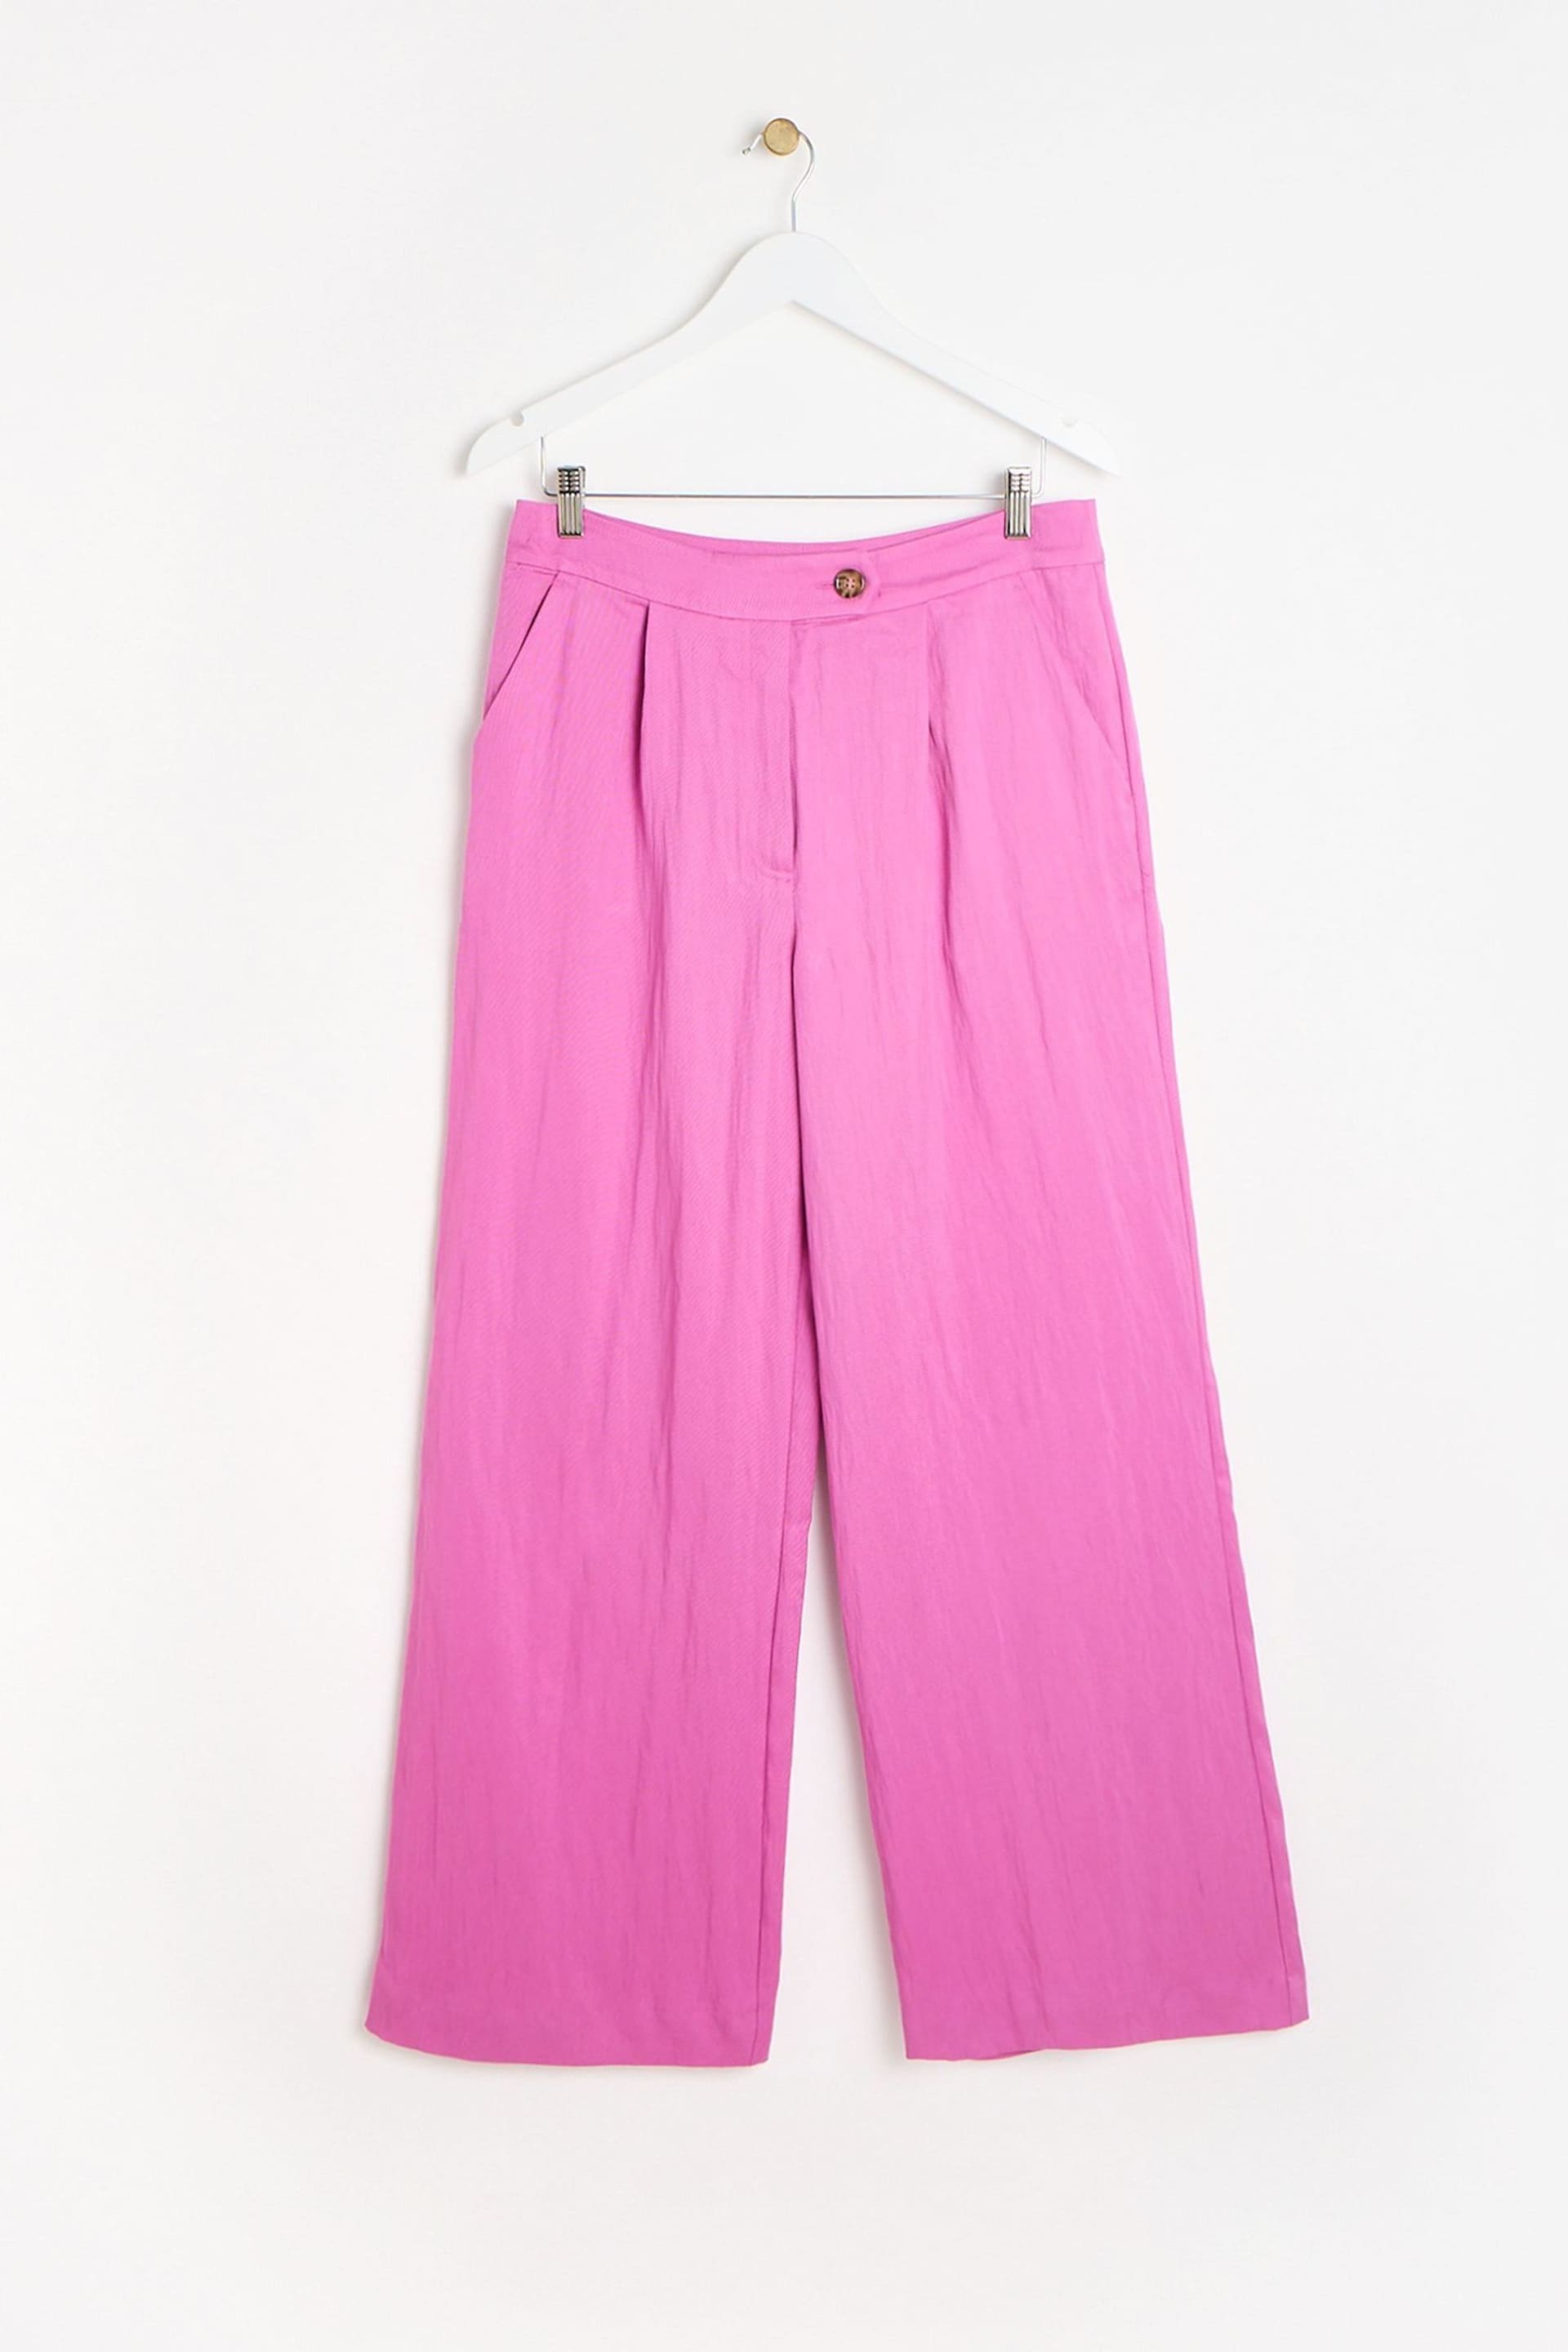 Oliver Bonas Pink Pleated Wide Leg Trousers - Image 3 of 6